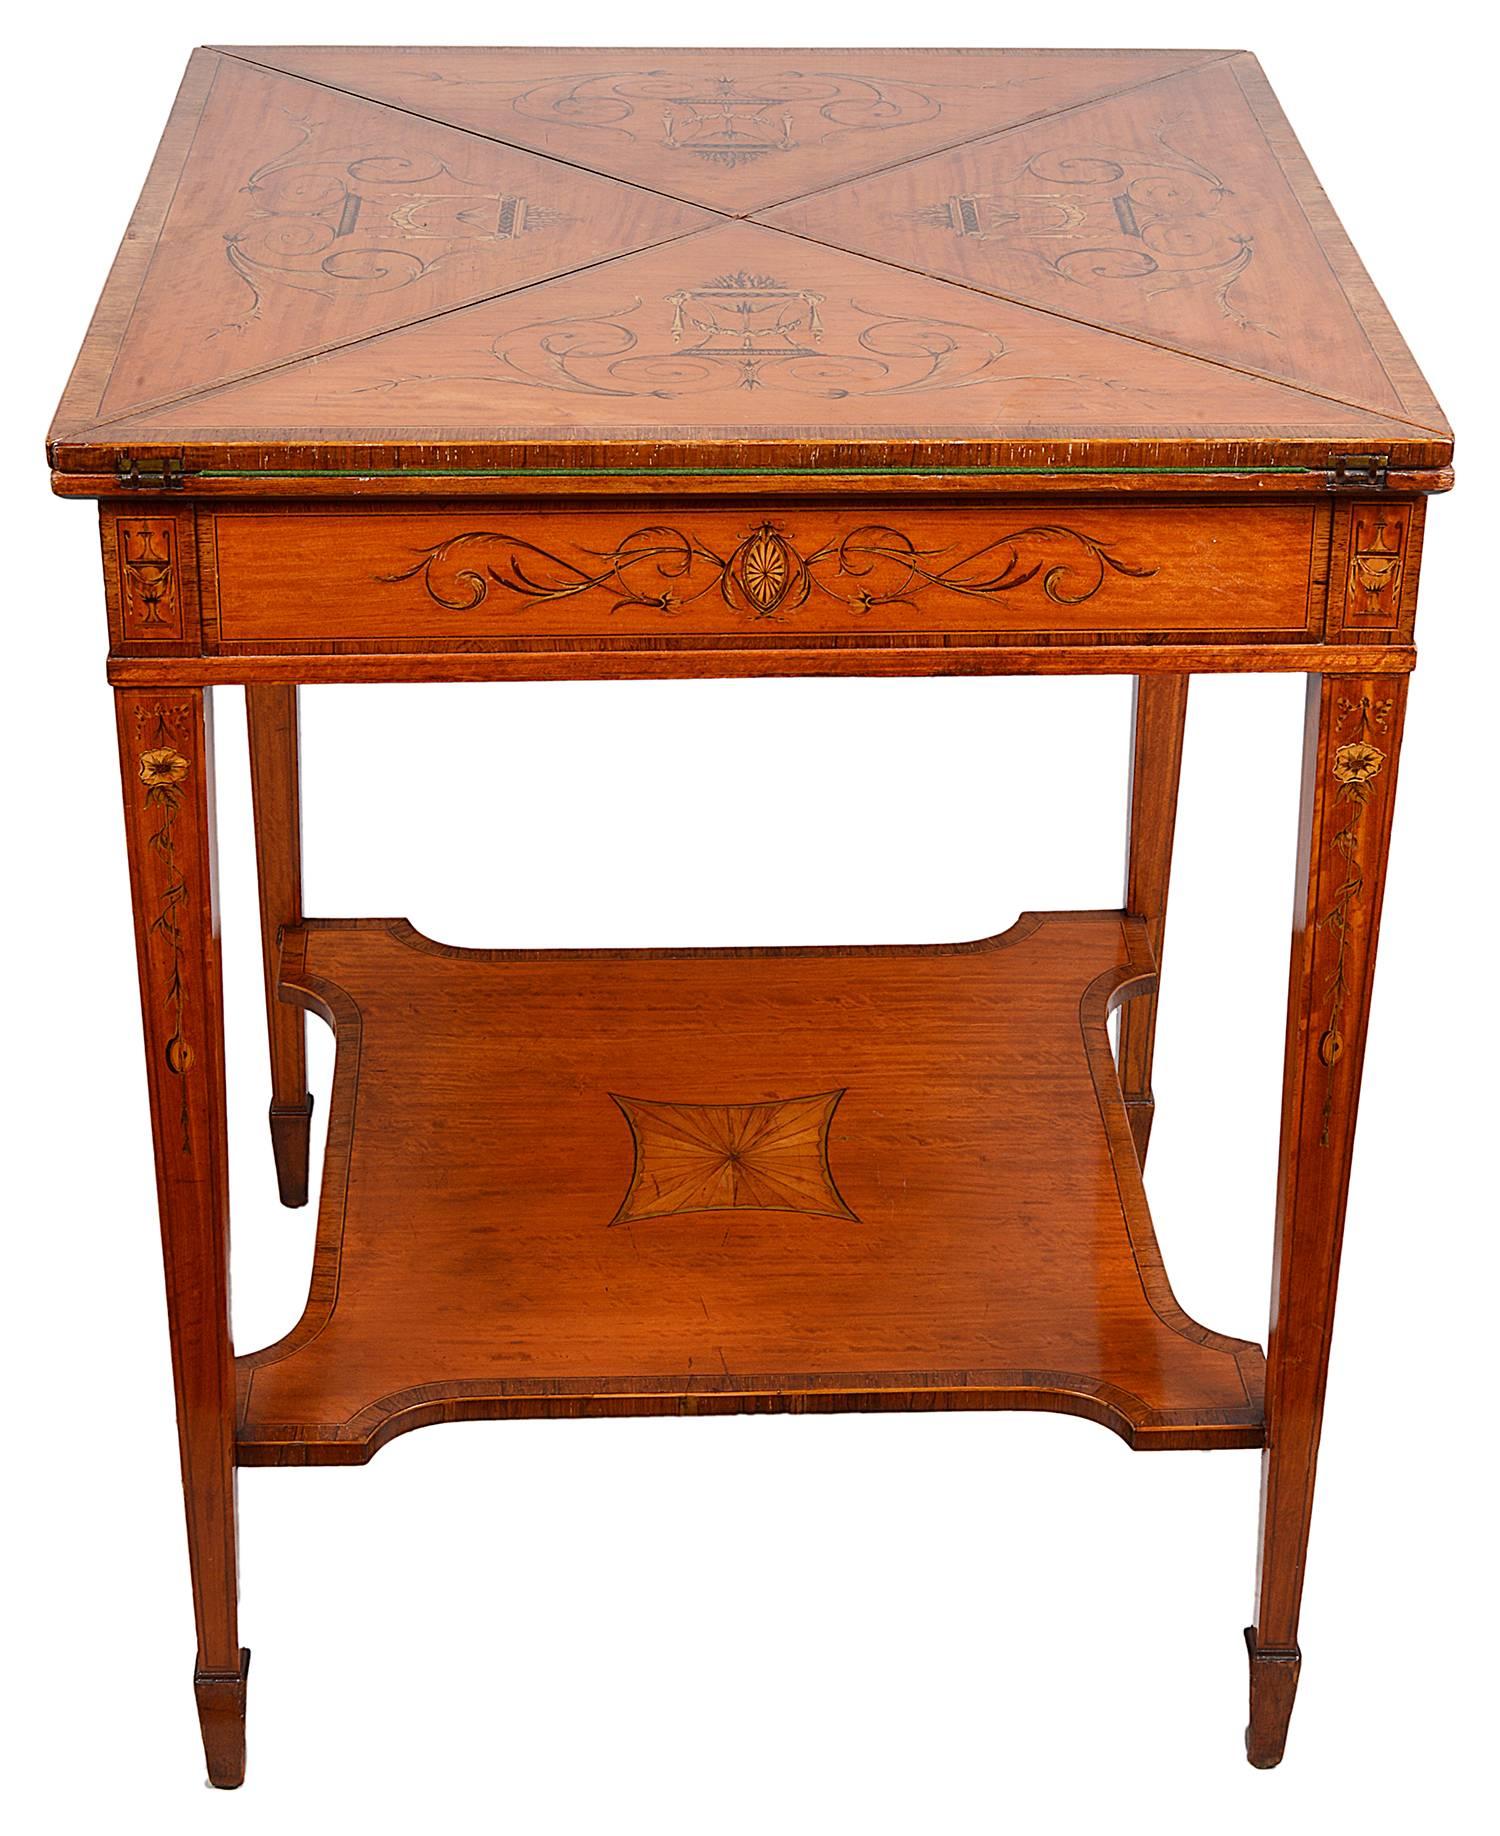 19th Century Edwardian Satinwood Inlaid Card Table For Sale